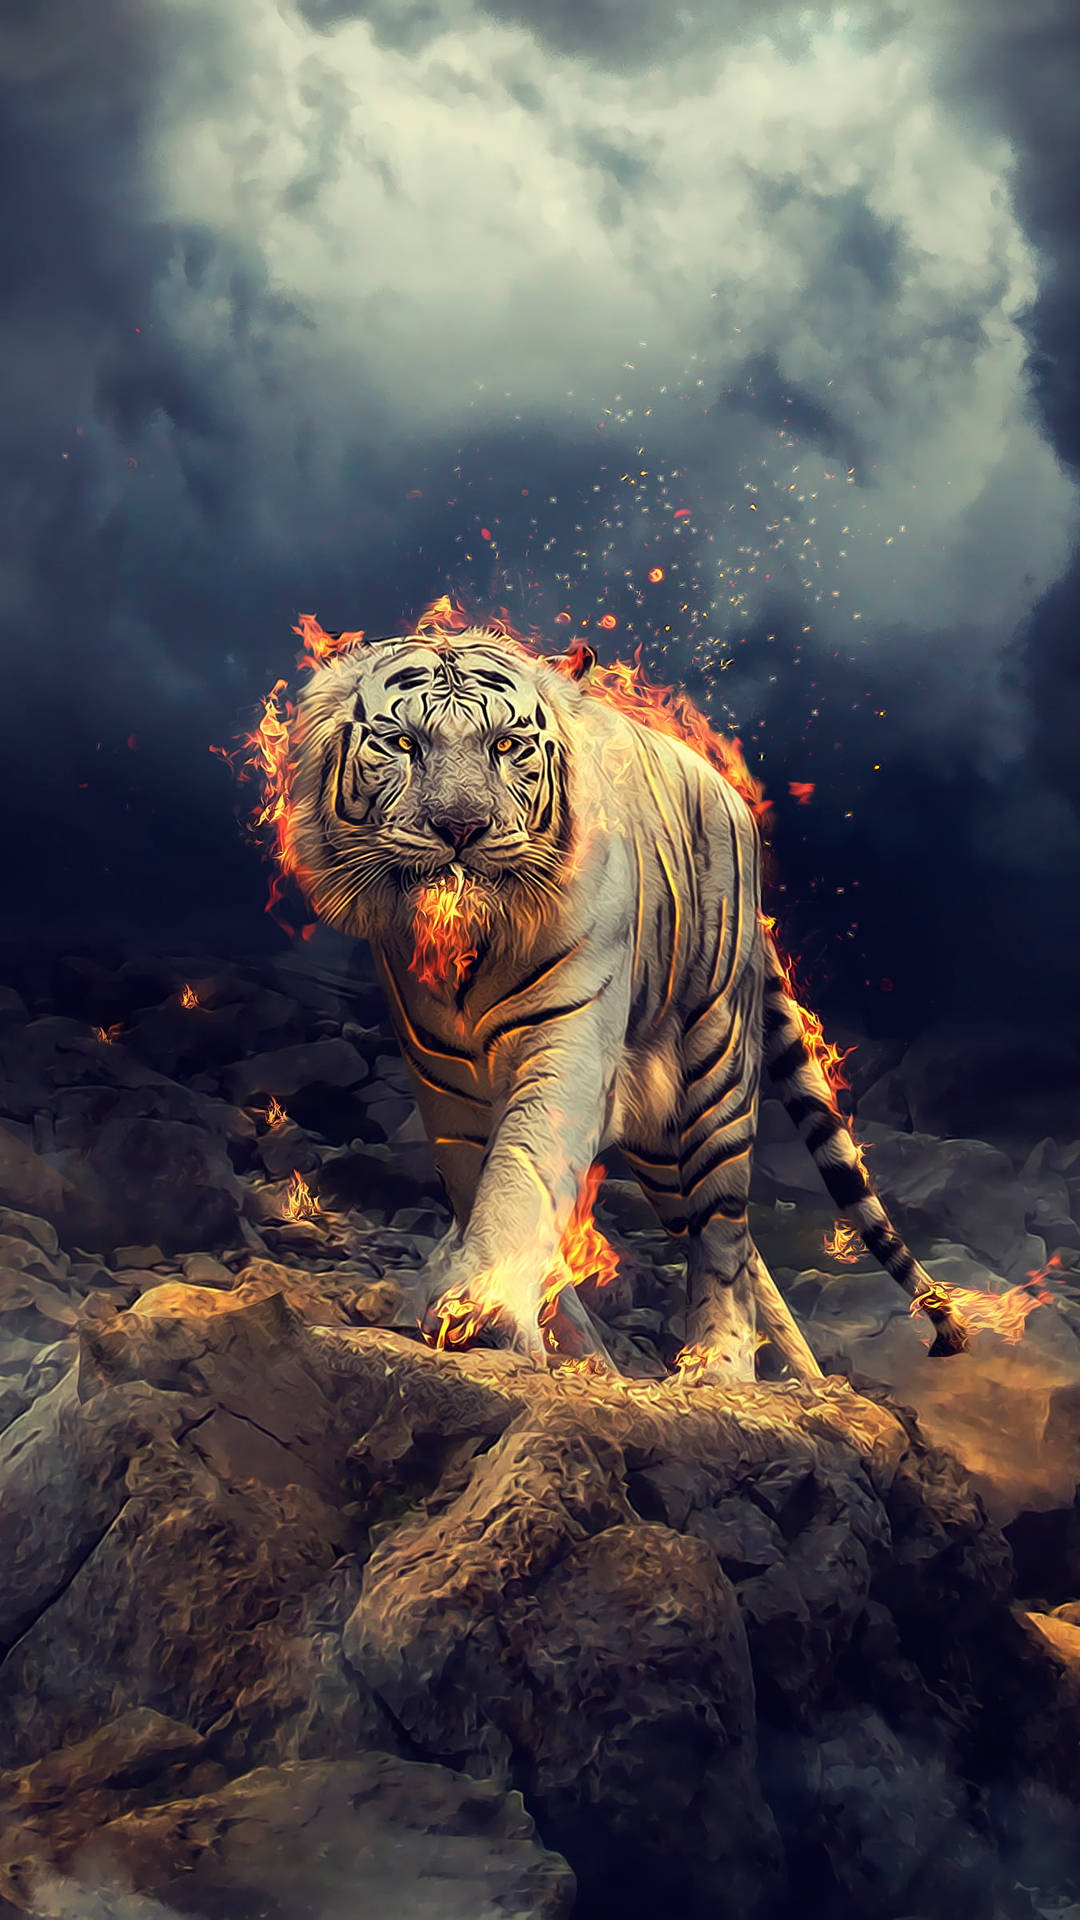 Cool Tiger Art With Fiery Embers Background